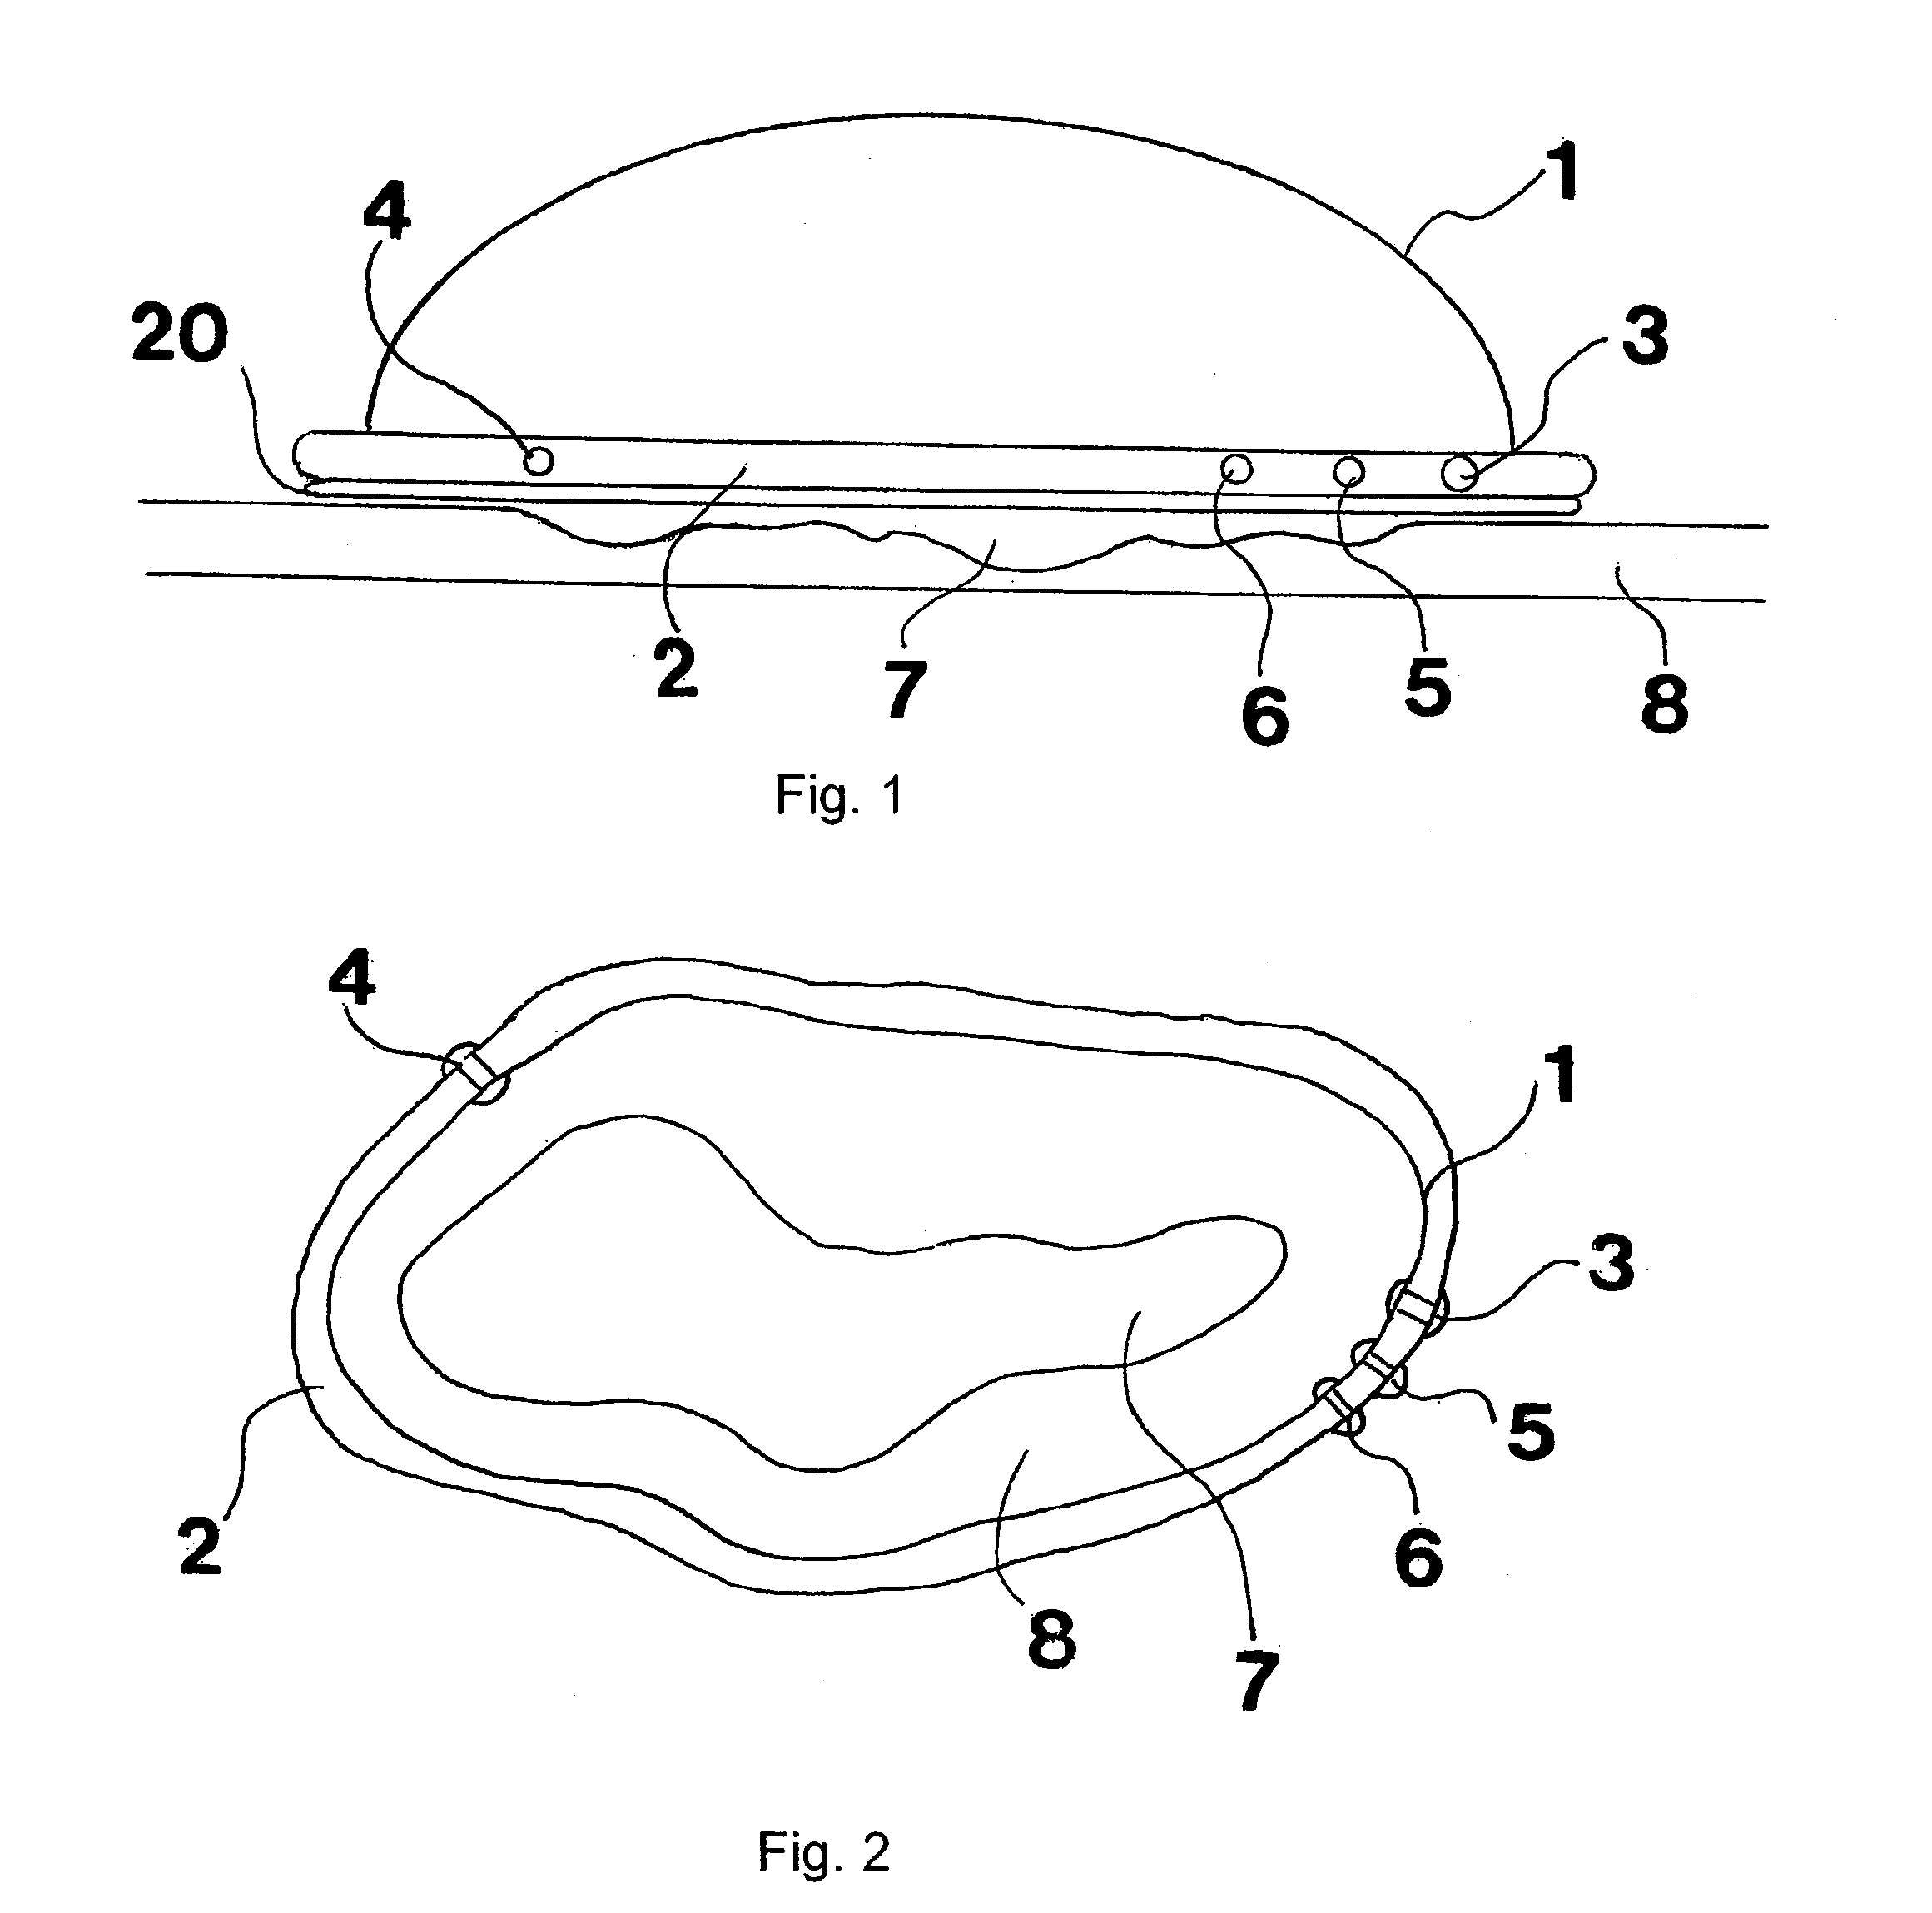 Method and apparatus for the deactivation of bacterial and fungal toxins in wounds, and for the disruption of wound biofilms